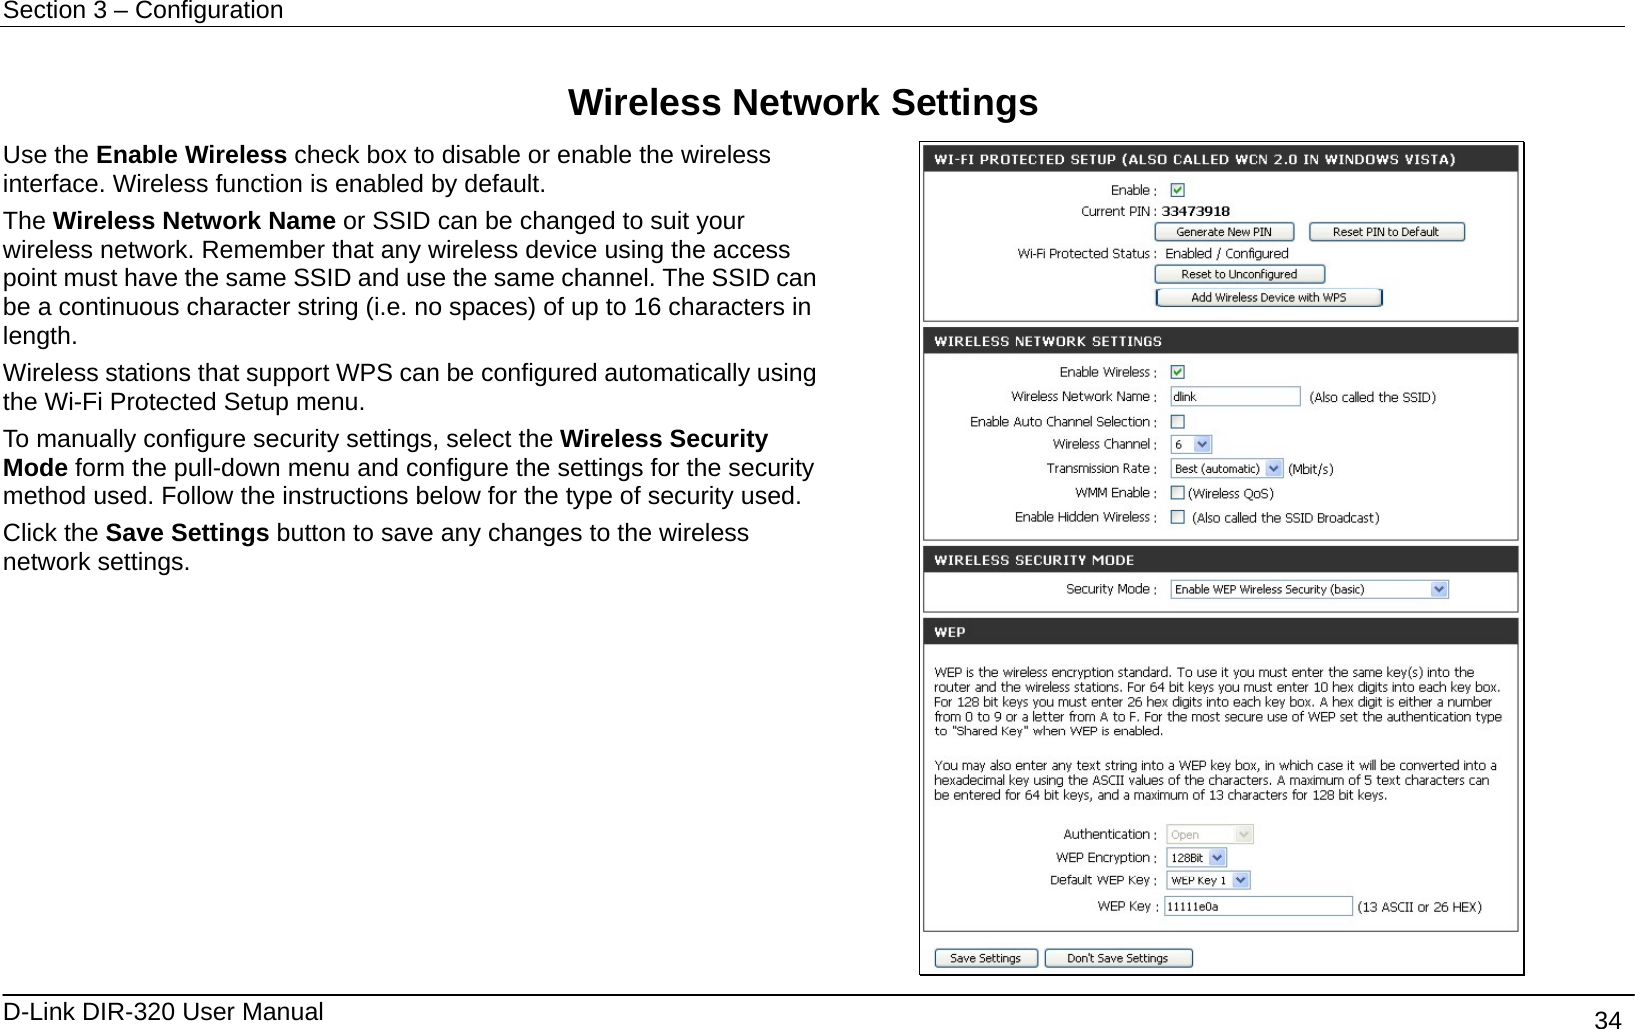 Section 3 – Configuration   D-Link DIR-320 User Manual                                       34  Wireless Network Settings Use the Enable Wireless check box to disable or enable the wireless interface. Wireless function is enabled by default.   The Wireless Network Name or SSID can be changed to suit your wireless network. Remember that any wireless device using the access point must have the same SSID and use the same channel. The SSID can be a continuous character string (i.e. no spaces) of up to 16 characters in length.  Wireless stations that support WPS can be configured automatically using the Wi-Fi Protected Setup menu. To manually configure security settings, select the Wireless Security Mode form the pull-down menu and configure the settings for the security method used. Follow the instructions below for the type of security used. Click the Save Settings button to save any changes to the wireless network settings.  